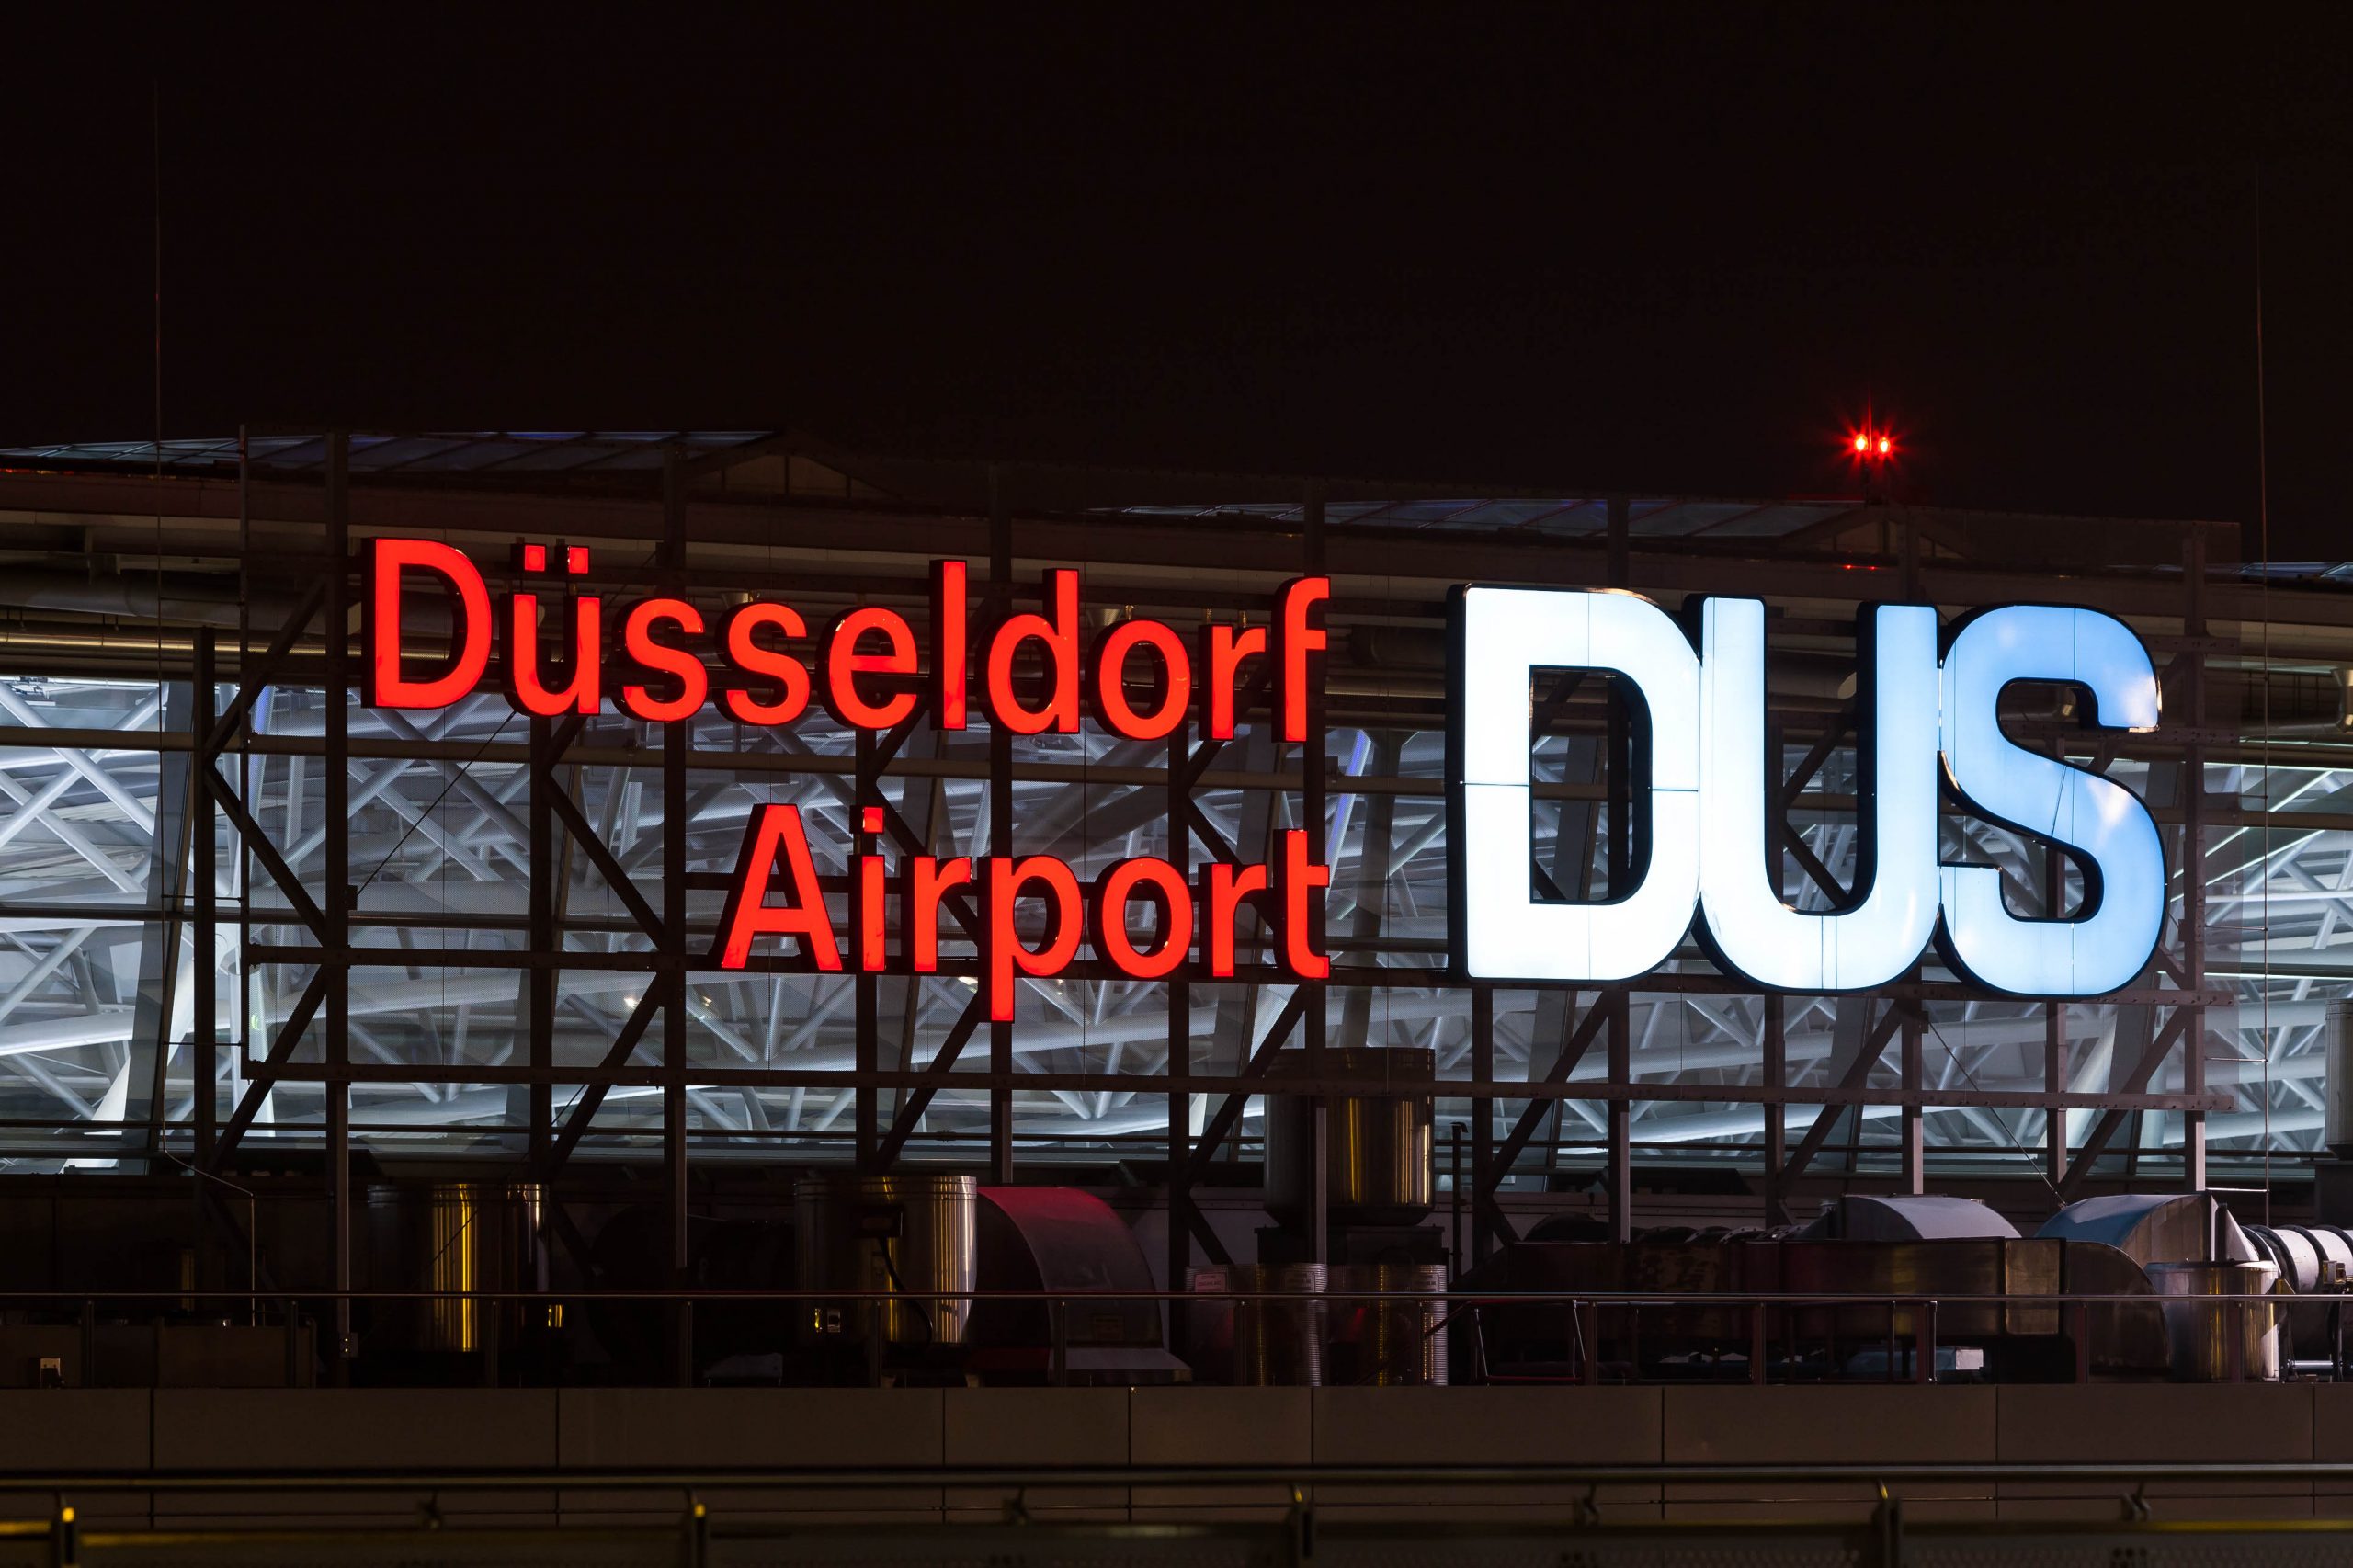 duesseldorf airport germany sign at night